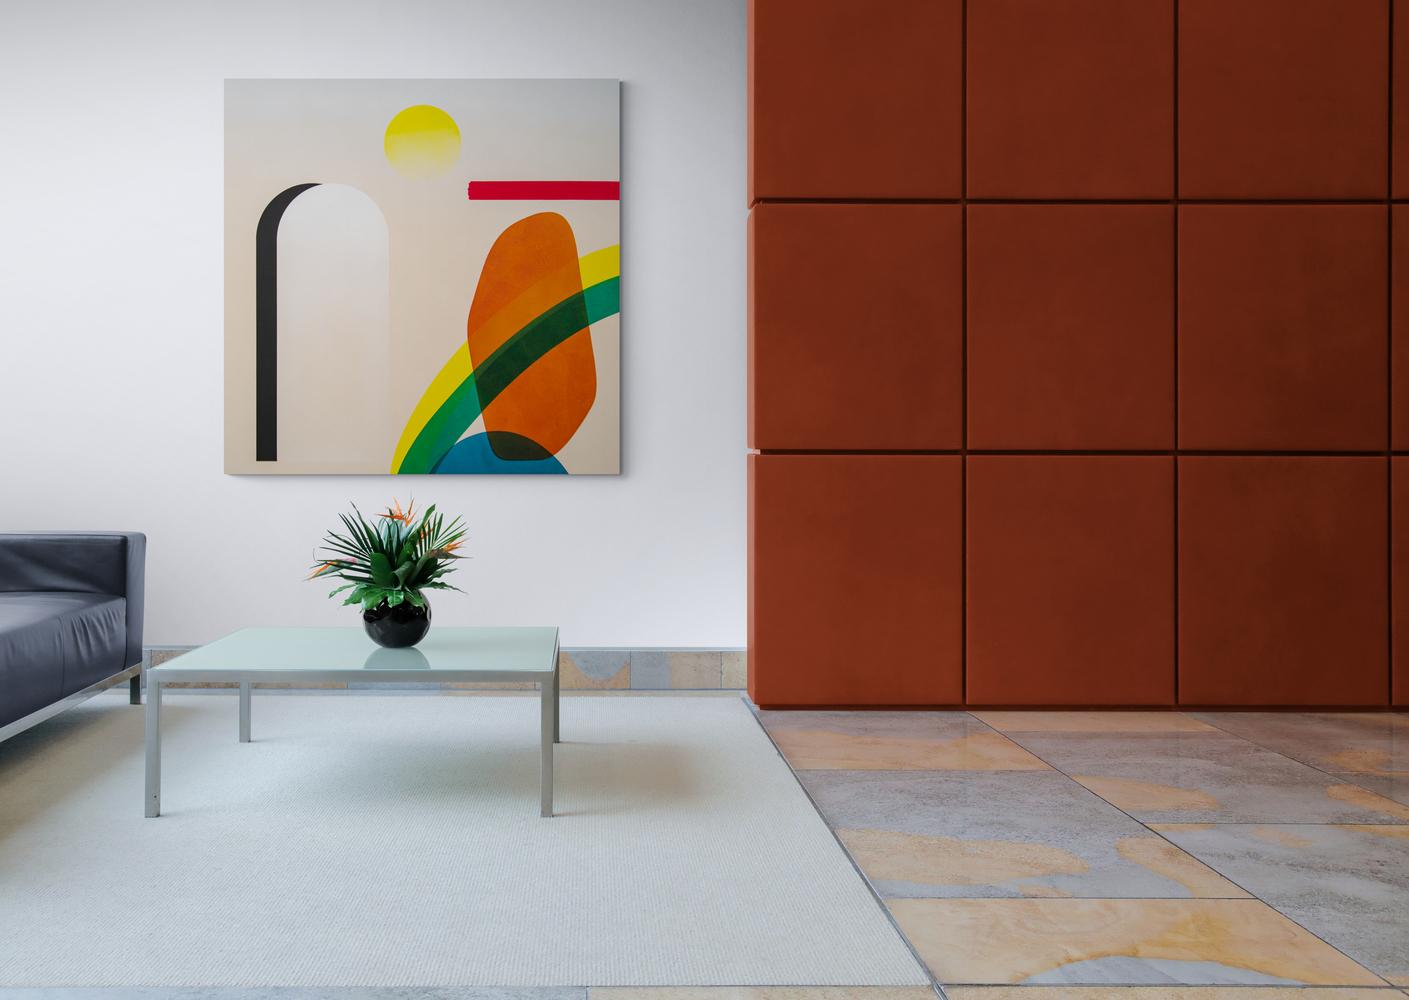 Calgary’s Aron Hill creates unique, pop art Inspired by the dynamic form and colour of abstract artists like Jack Bush. This piece in acrylic and ink on canvas combines architectural shapes—an open archway framed in black, a yellow sun and a